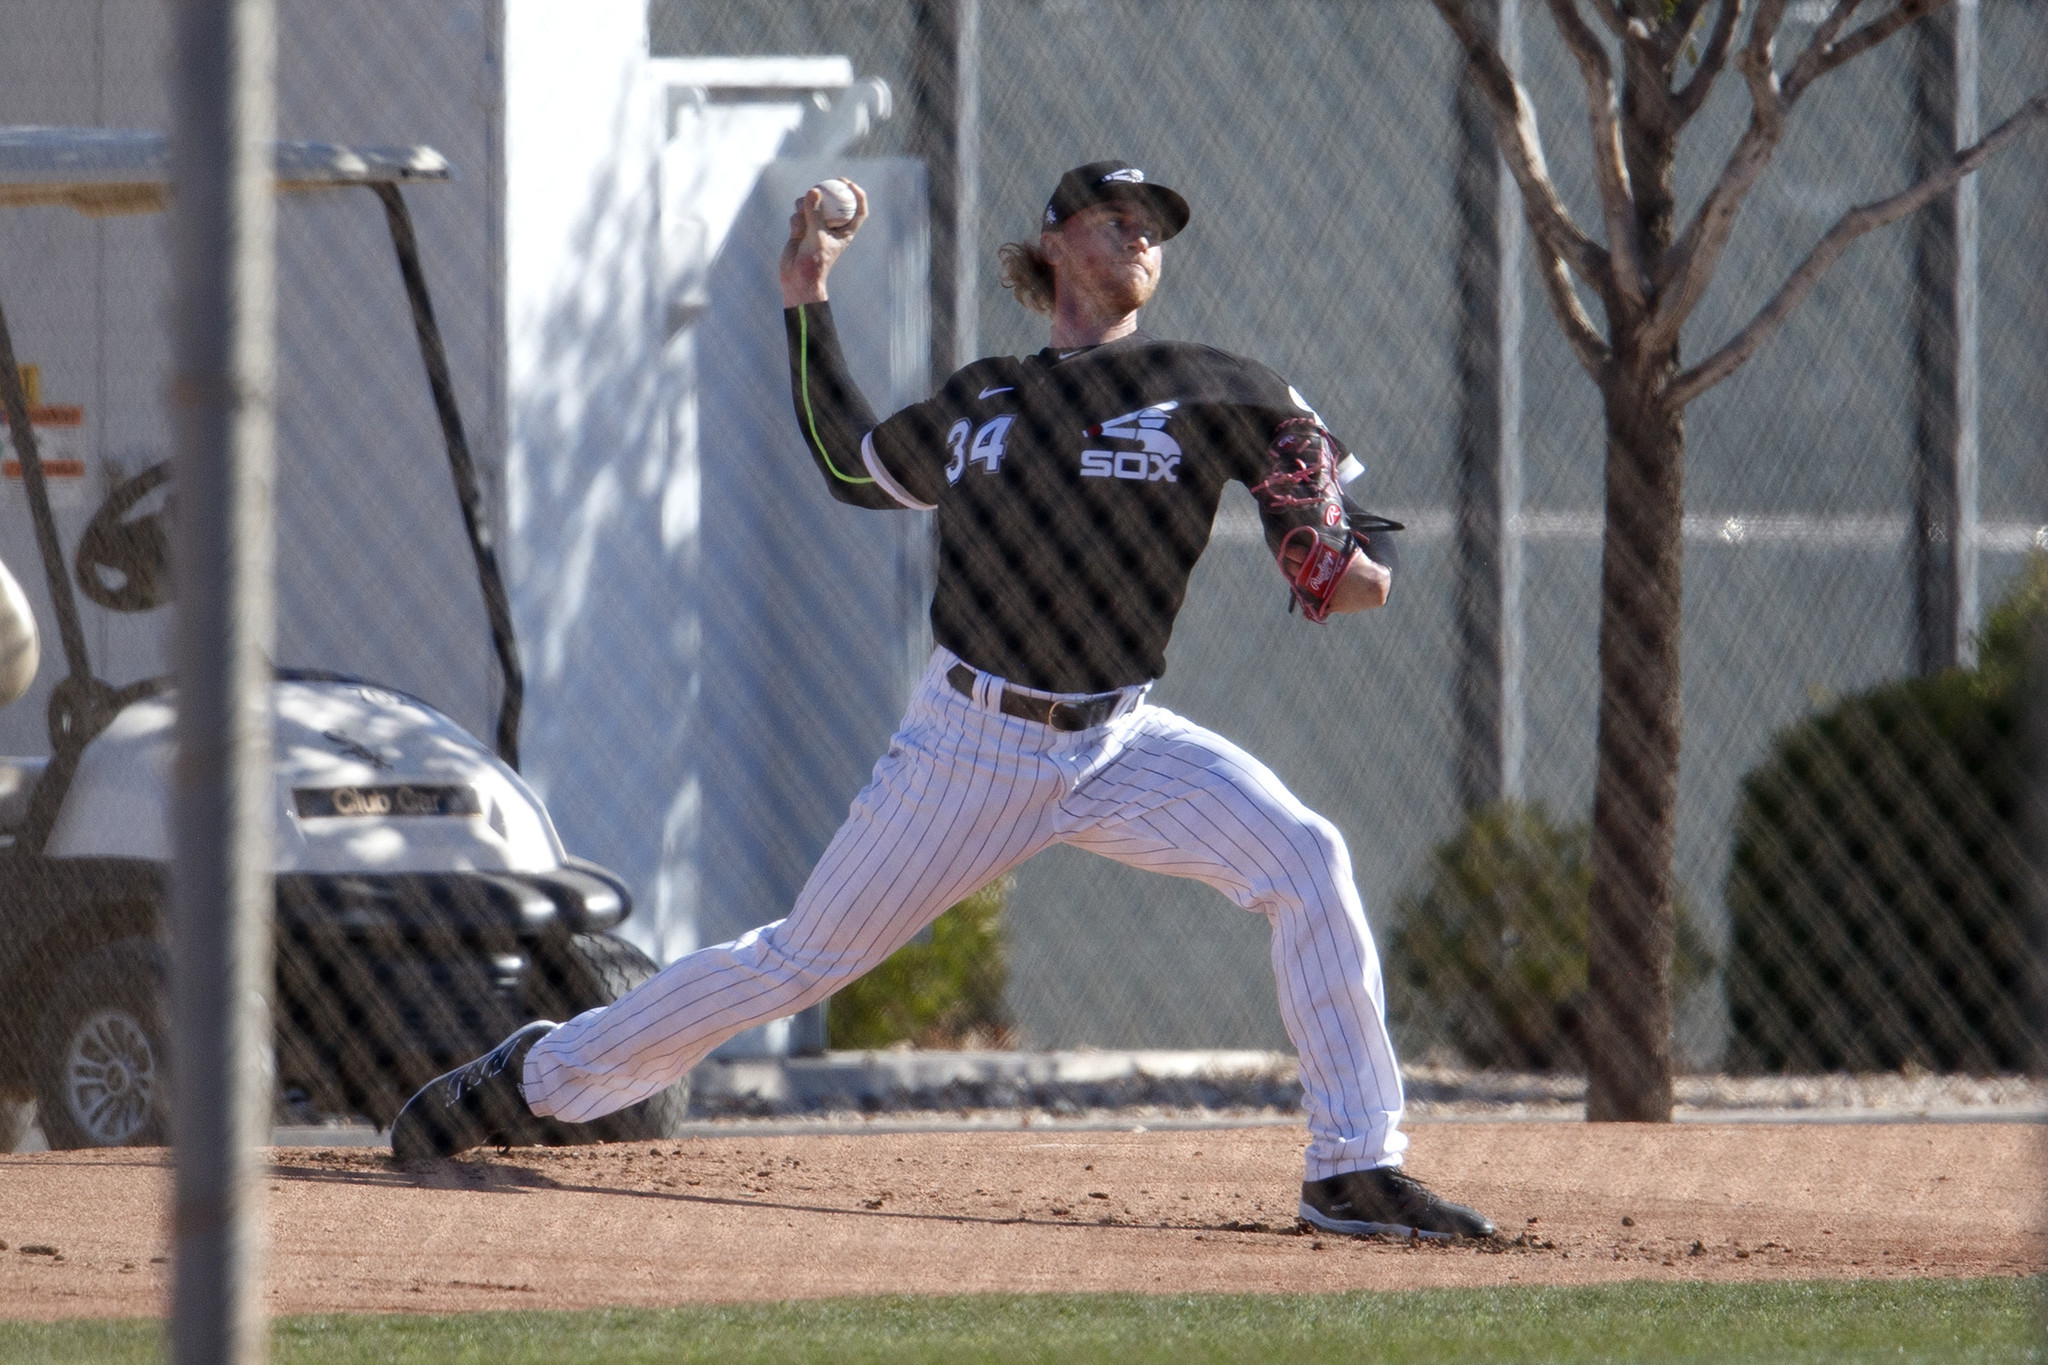 White Sox DH Andrew Vaughn could jump from Class A to MLB